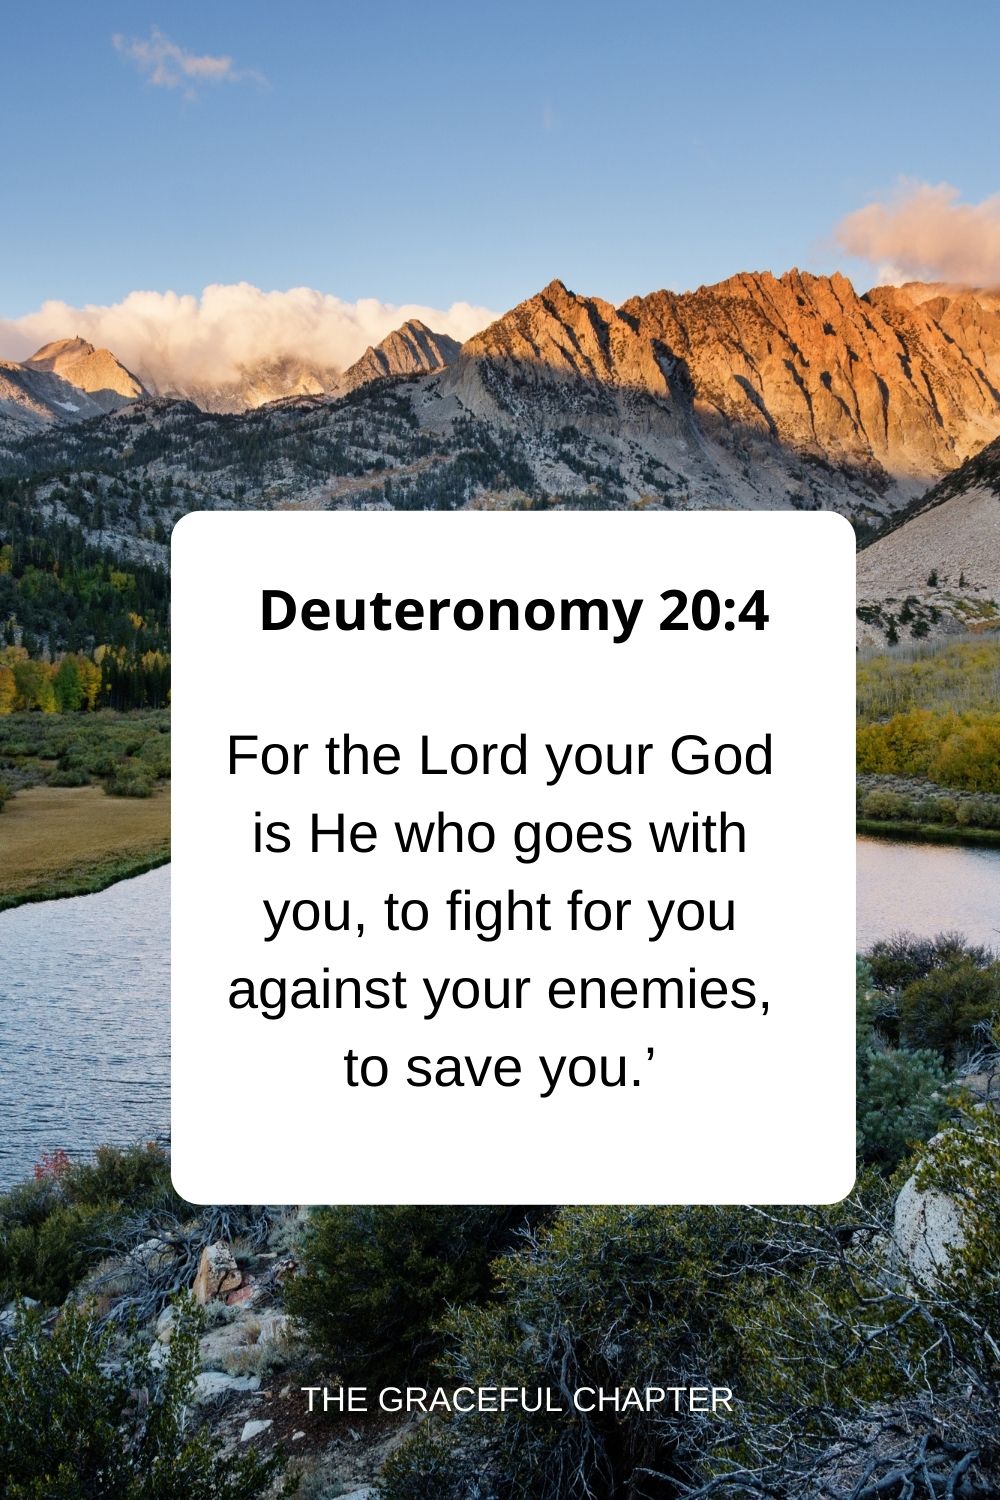 For the Lord your God is He who goes with you, to fight for you against your enemies, to save you.’ Deuteronomy 20:4